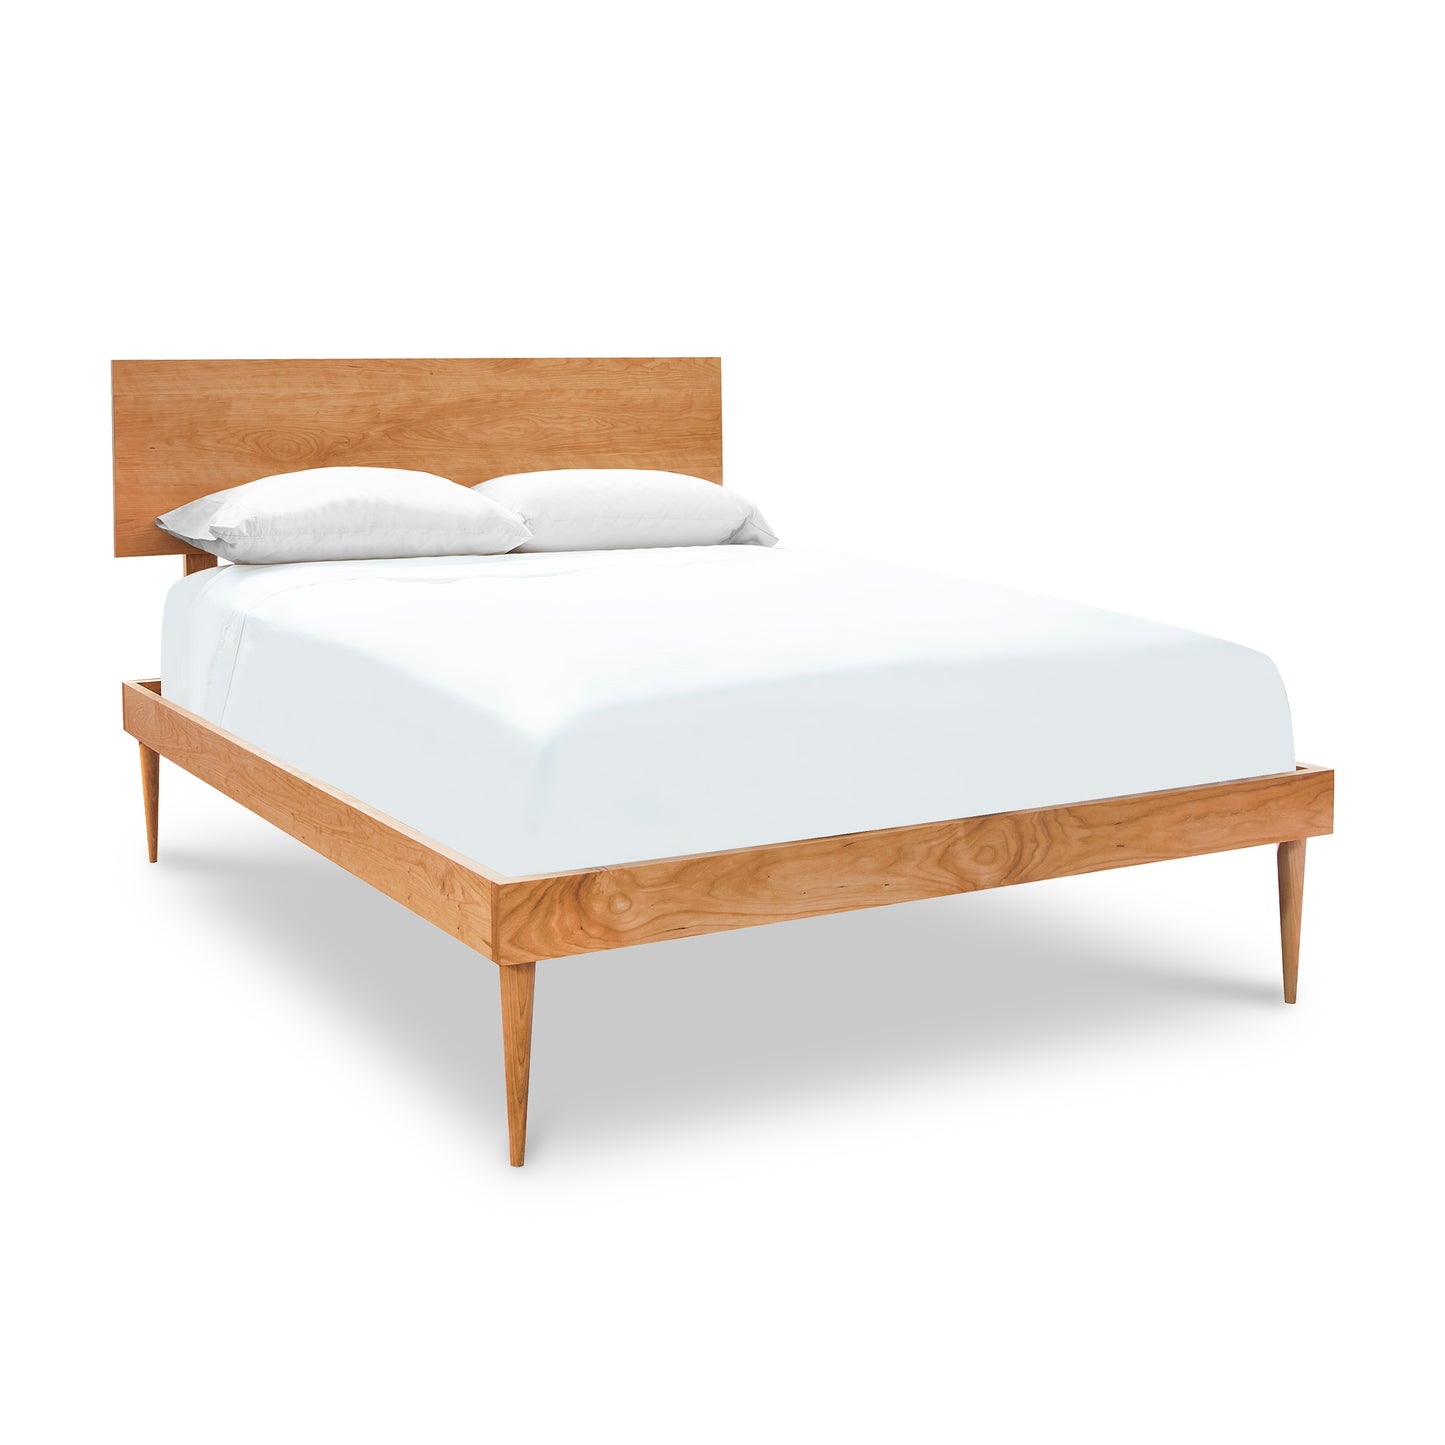 A Larssen Bed by Vermont Furniture Designs, featuring a Mid-century modern design wooden bed frame with a headboard, fitted with white bedding and two pillows, isolated on a white background.